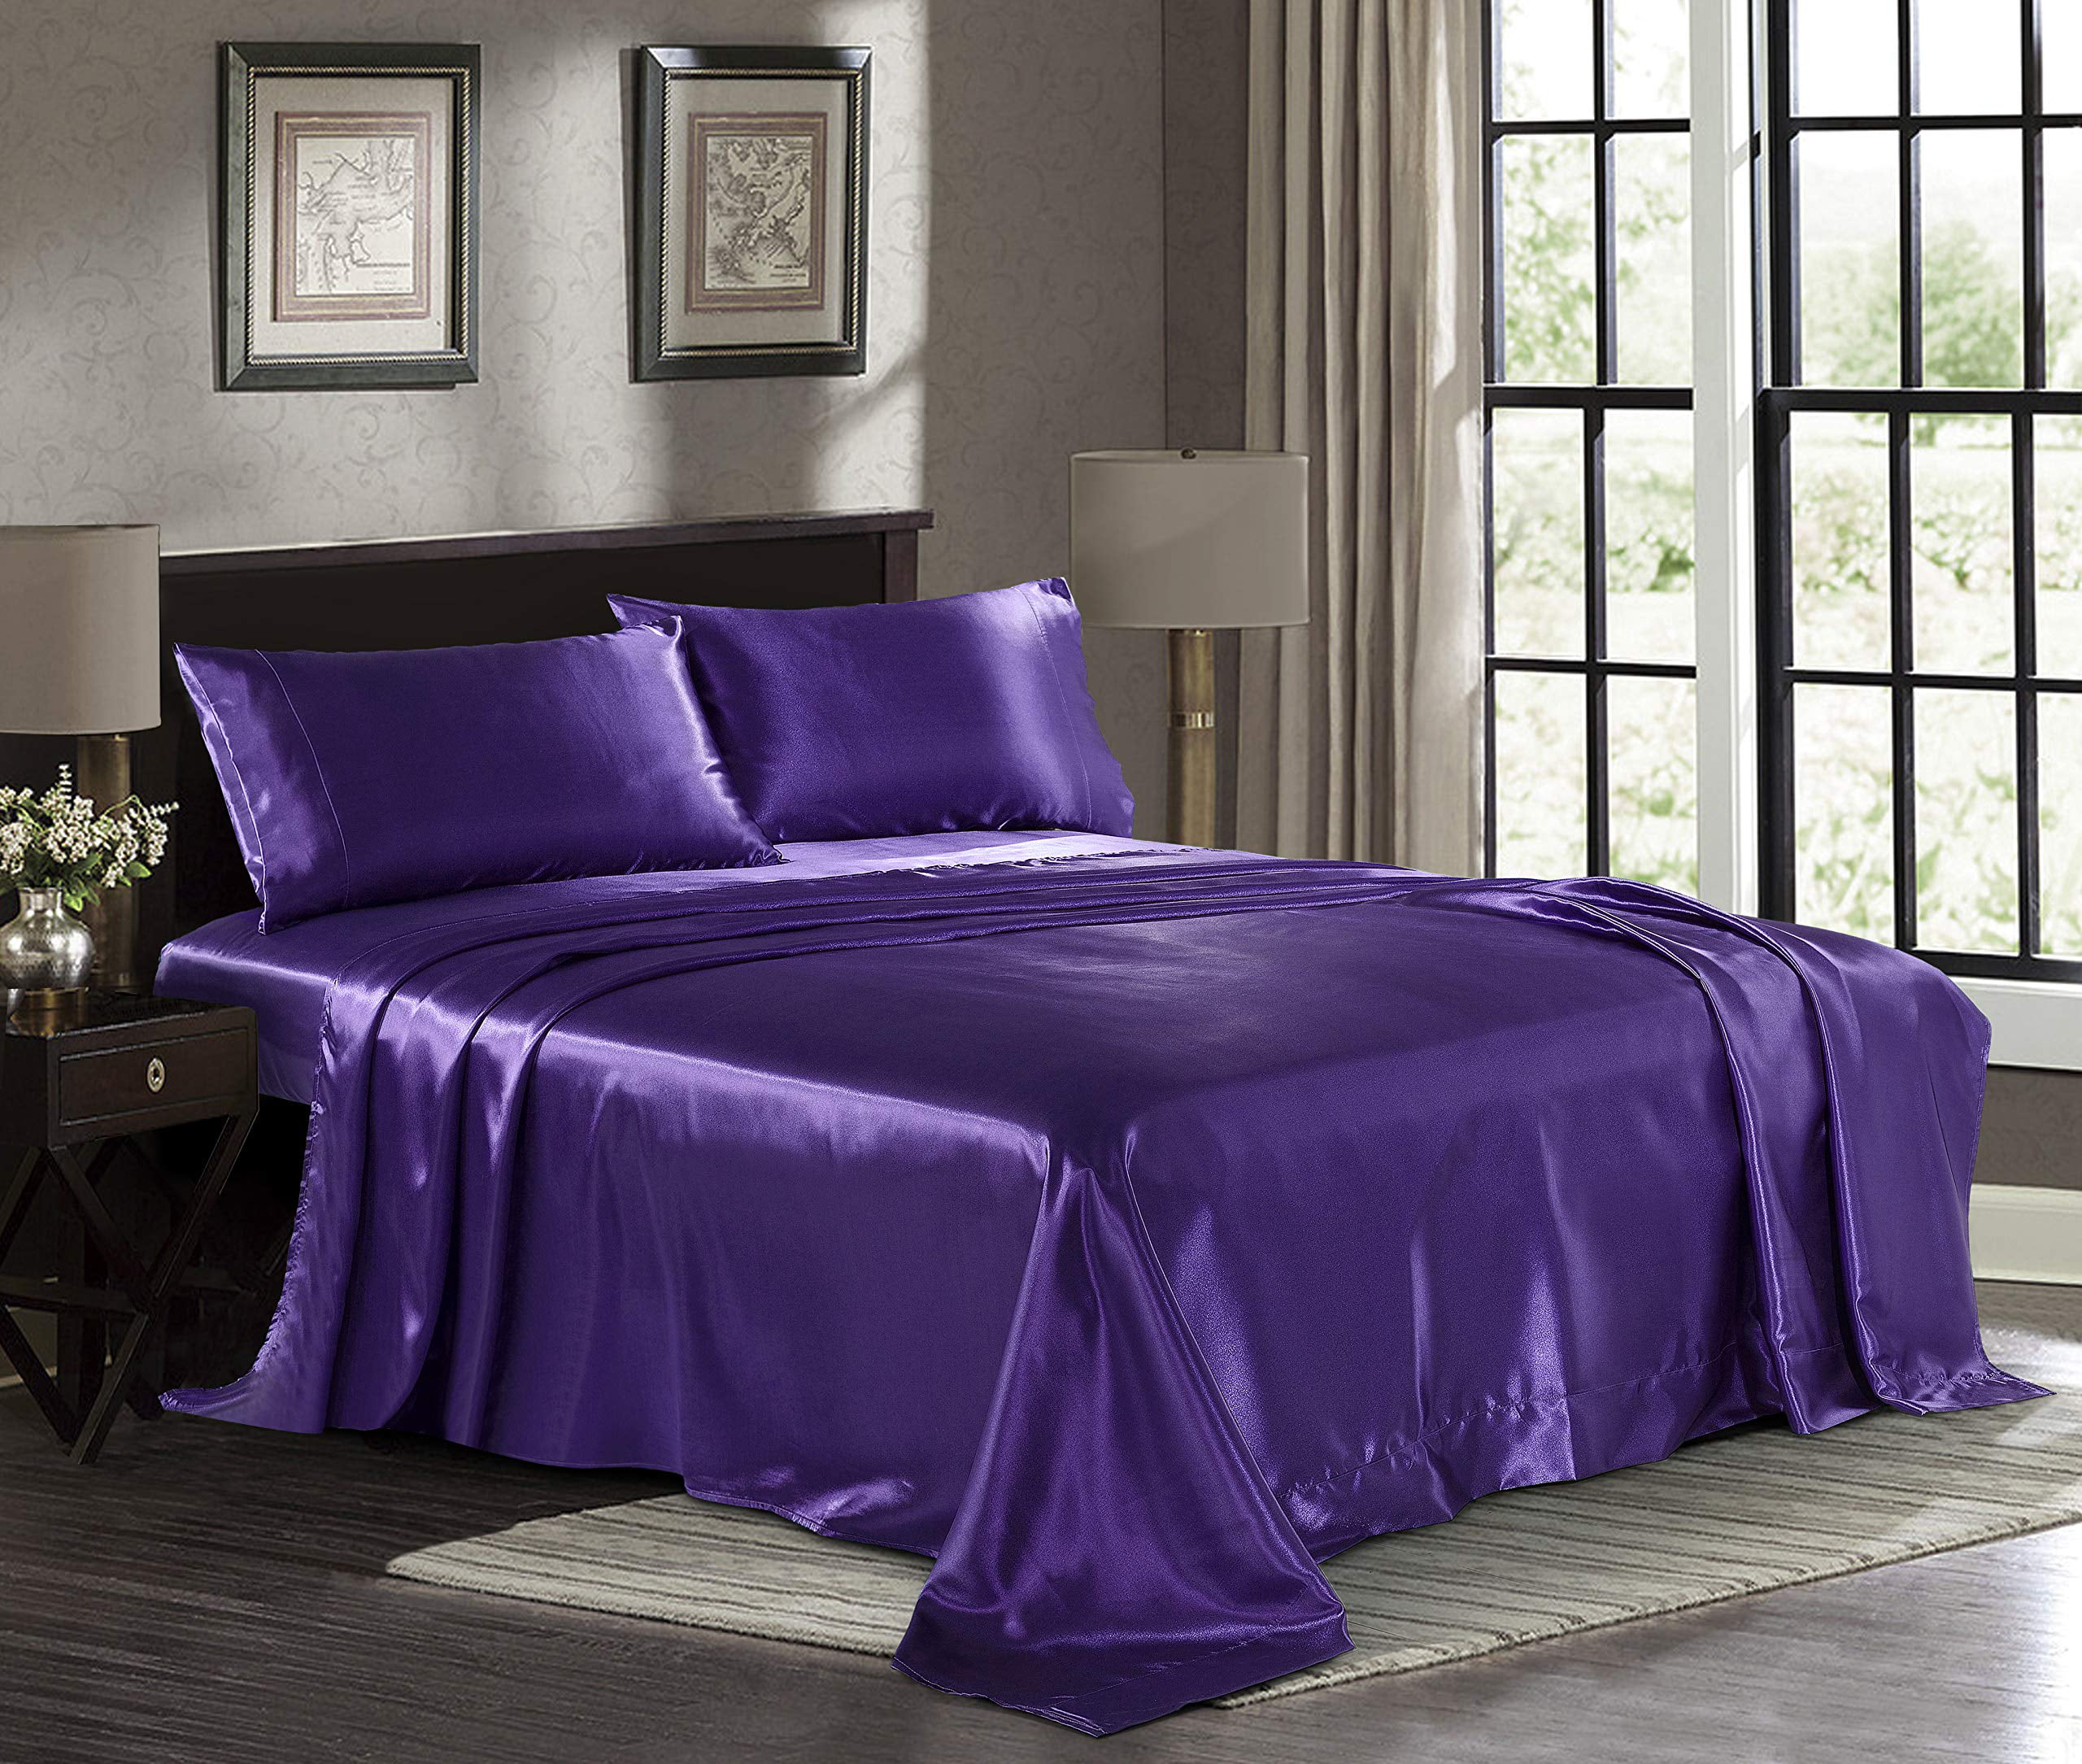 Satin Sheets King [4Piece, Purple] Hotel Luxury Silky Bed Sheets Extra Soft 1800 Microfiber